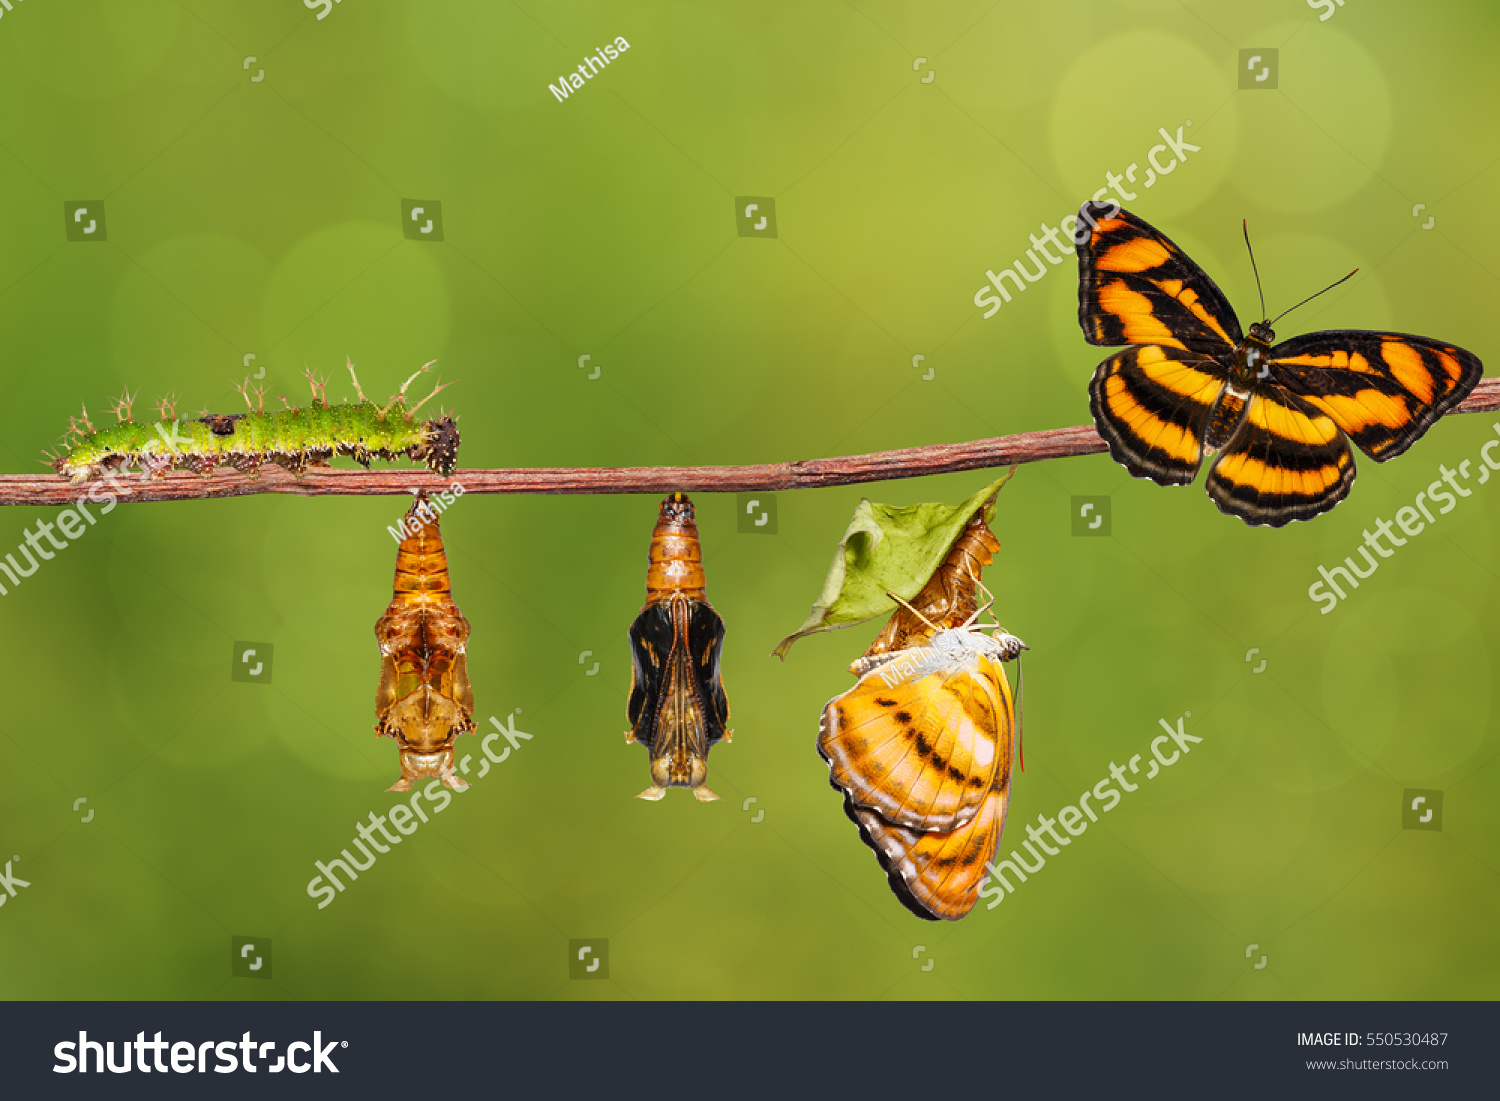 Life cycle of colour segeant butterfly ( Athyma nefte ) from caterpillar and pupa , metamorphosis , growth hanging on twig  #550530487